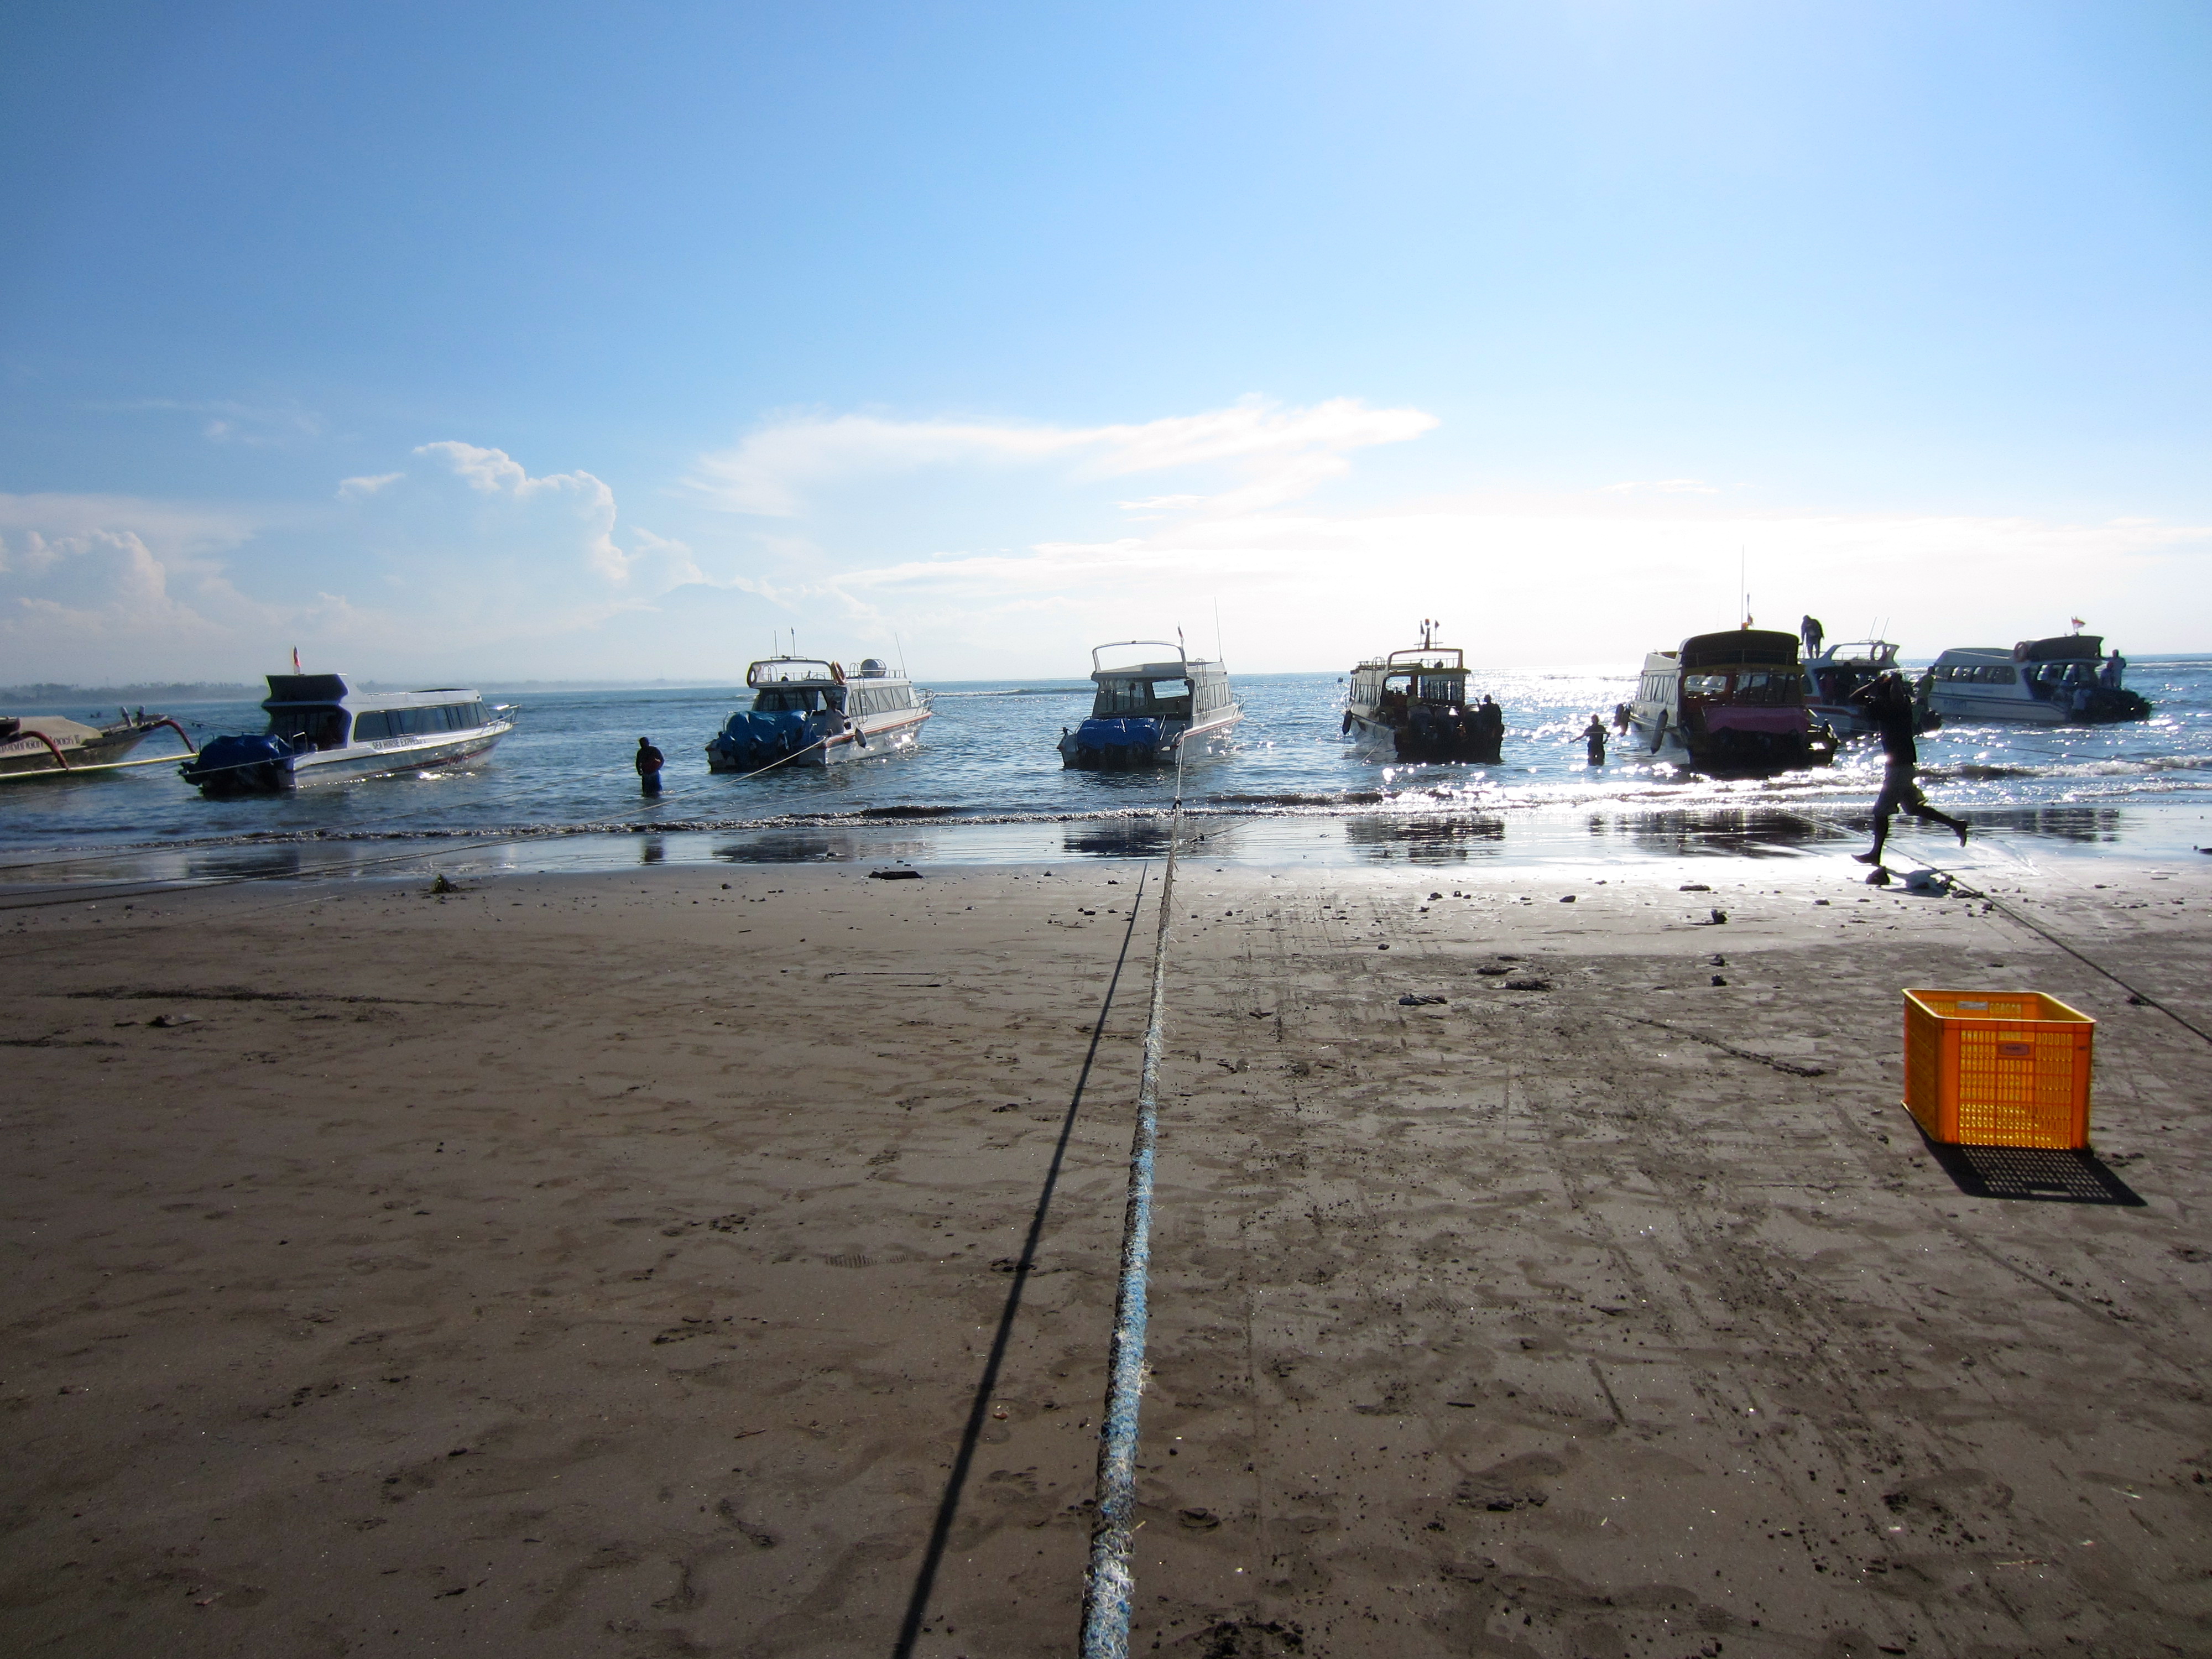 Small boats tied up at the beach